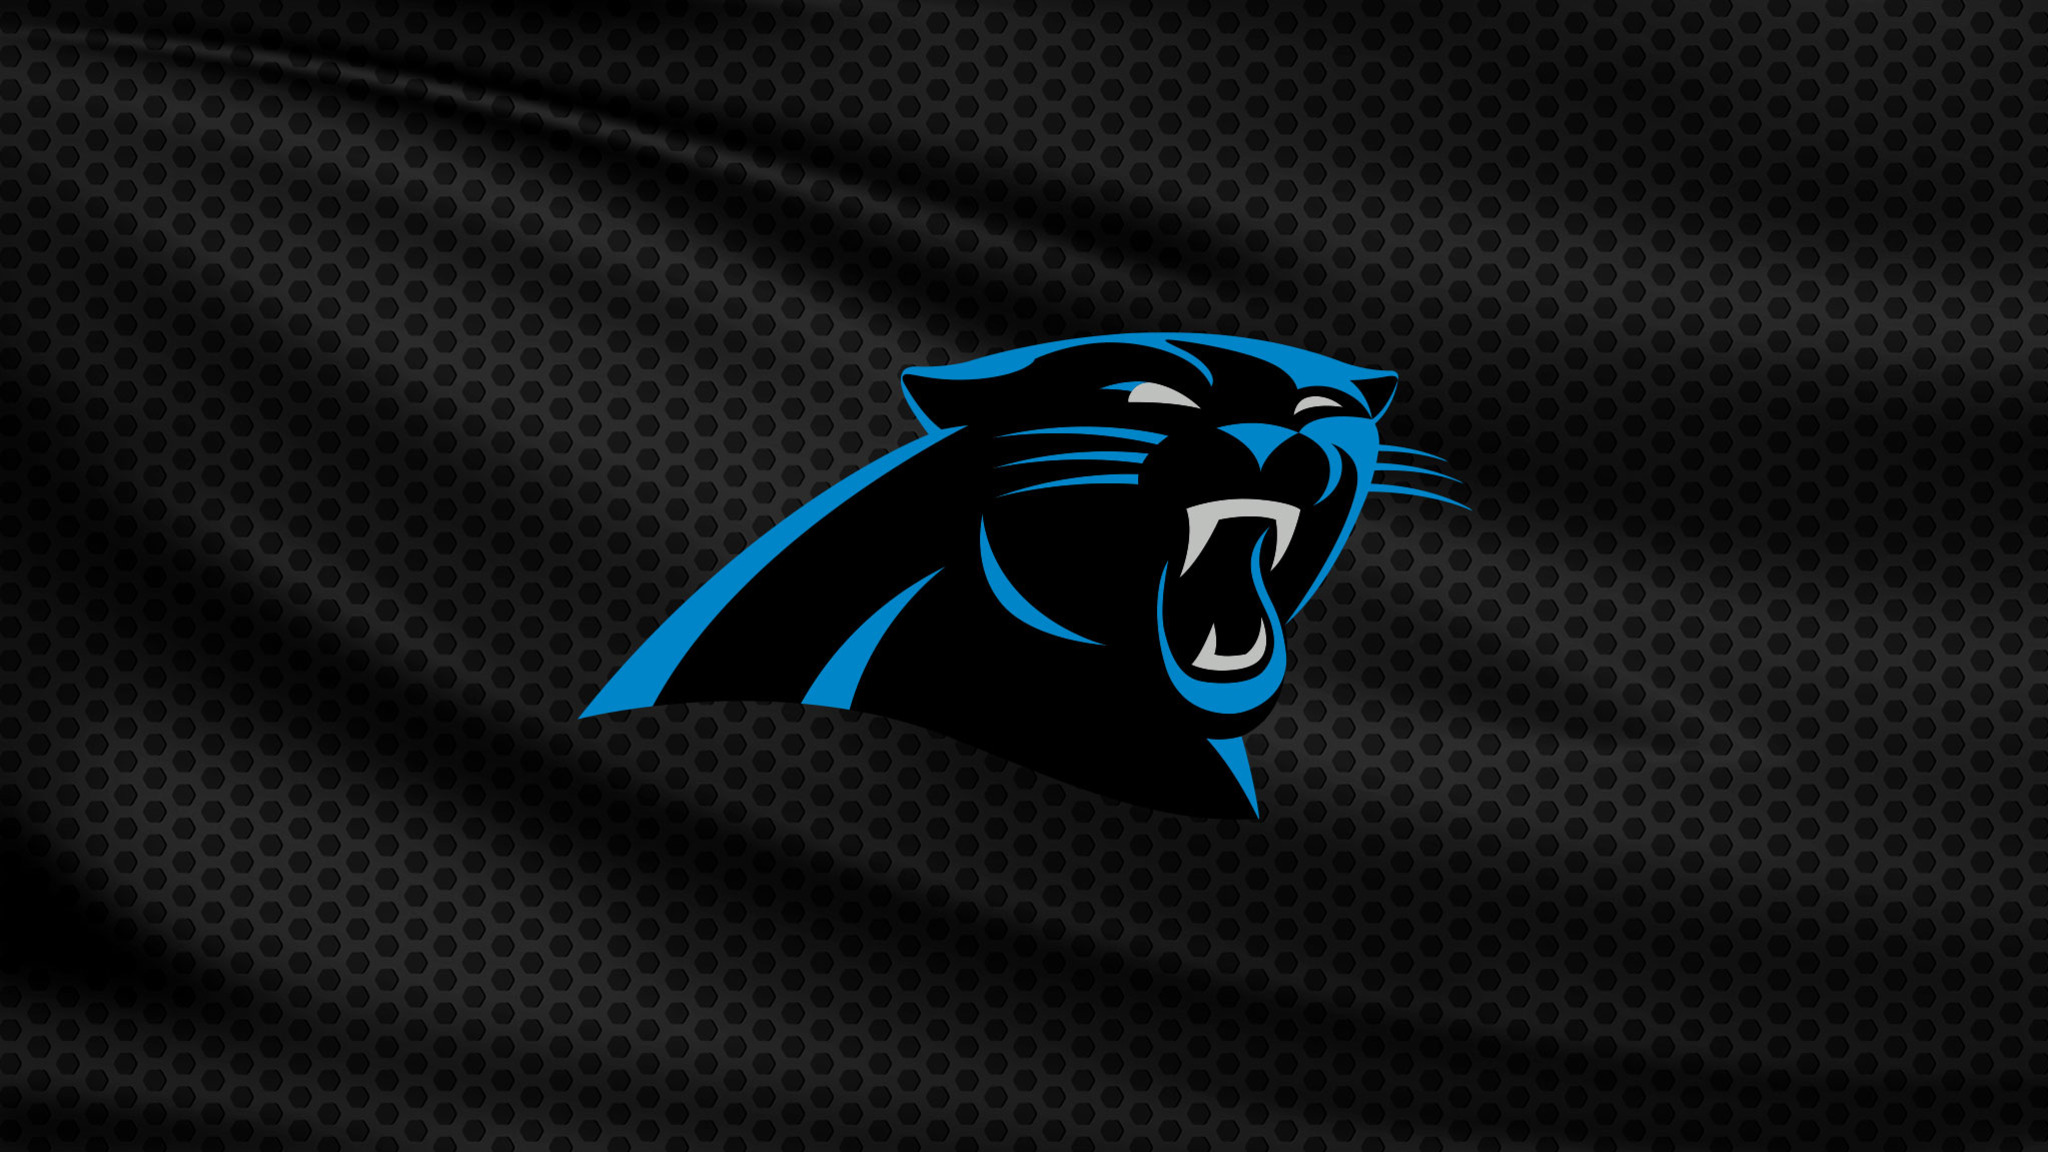 Carolina Panthers NFL Draft Party Tickets Single Game Tickets